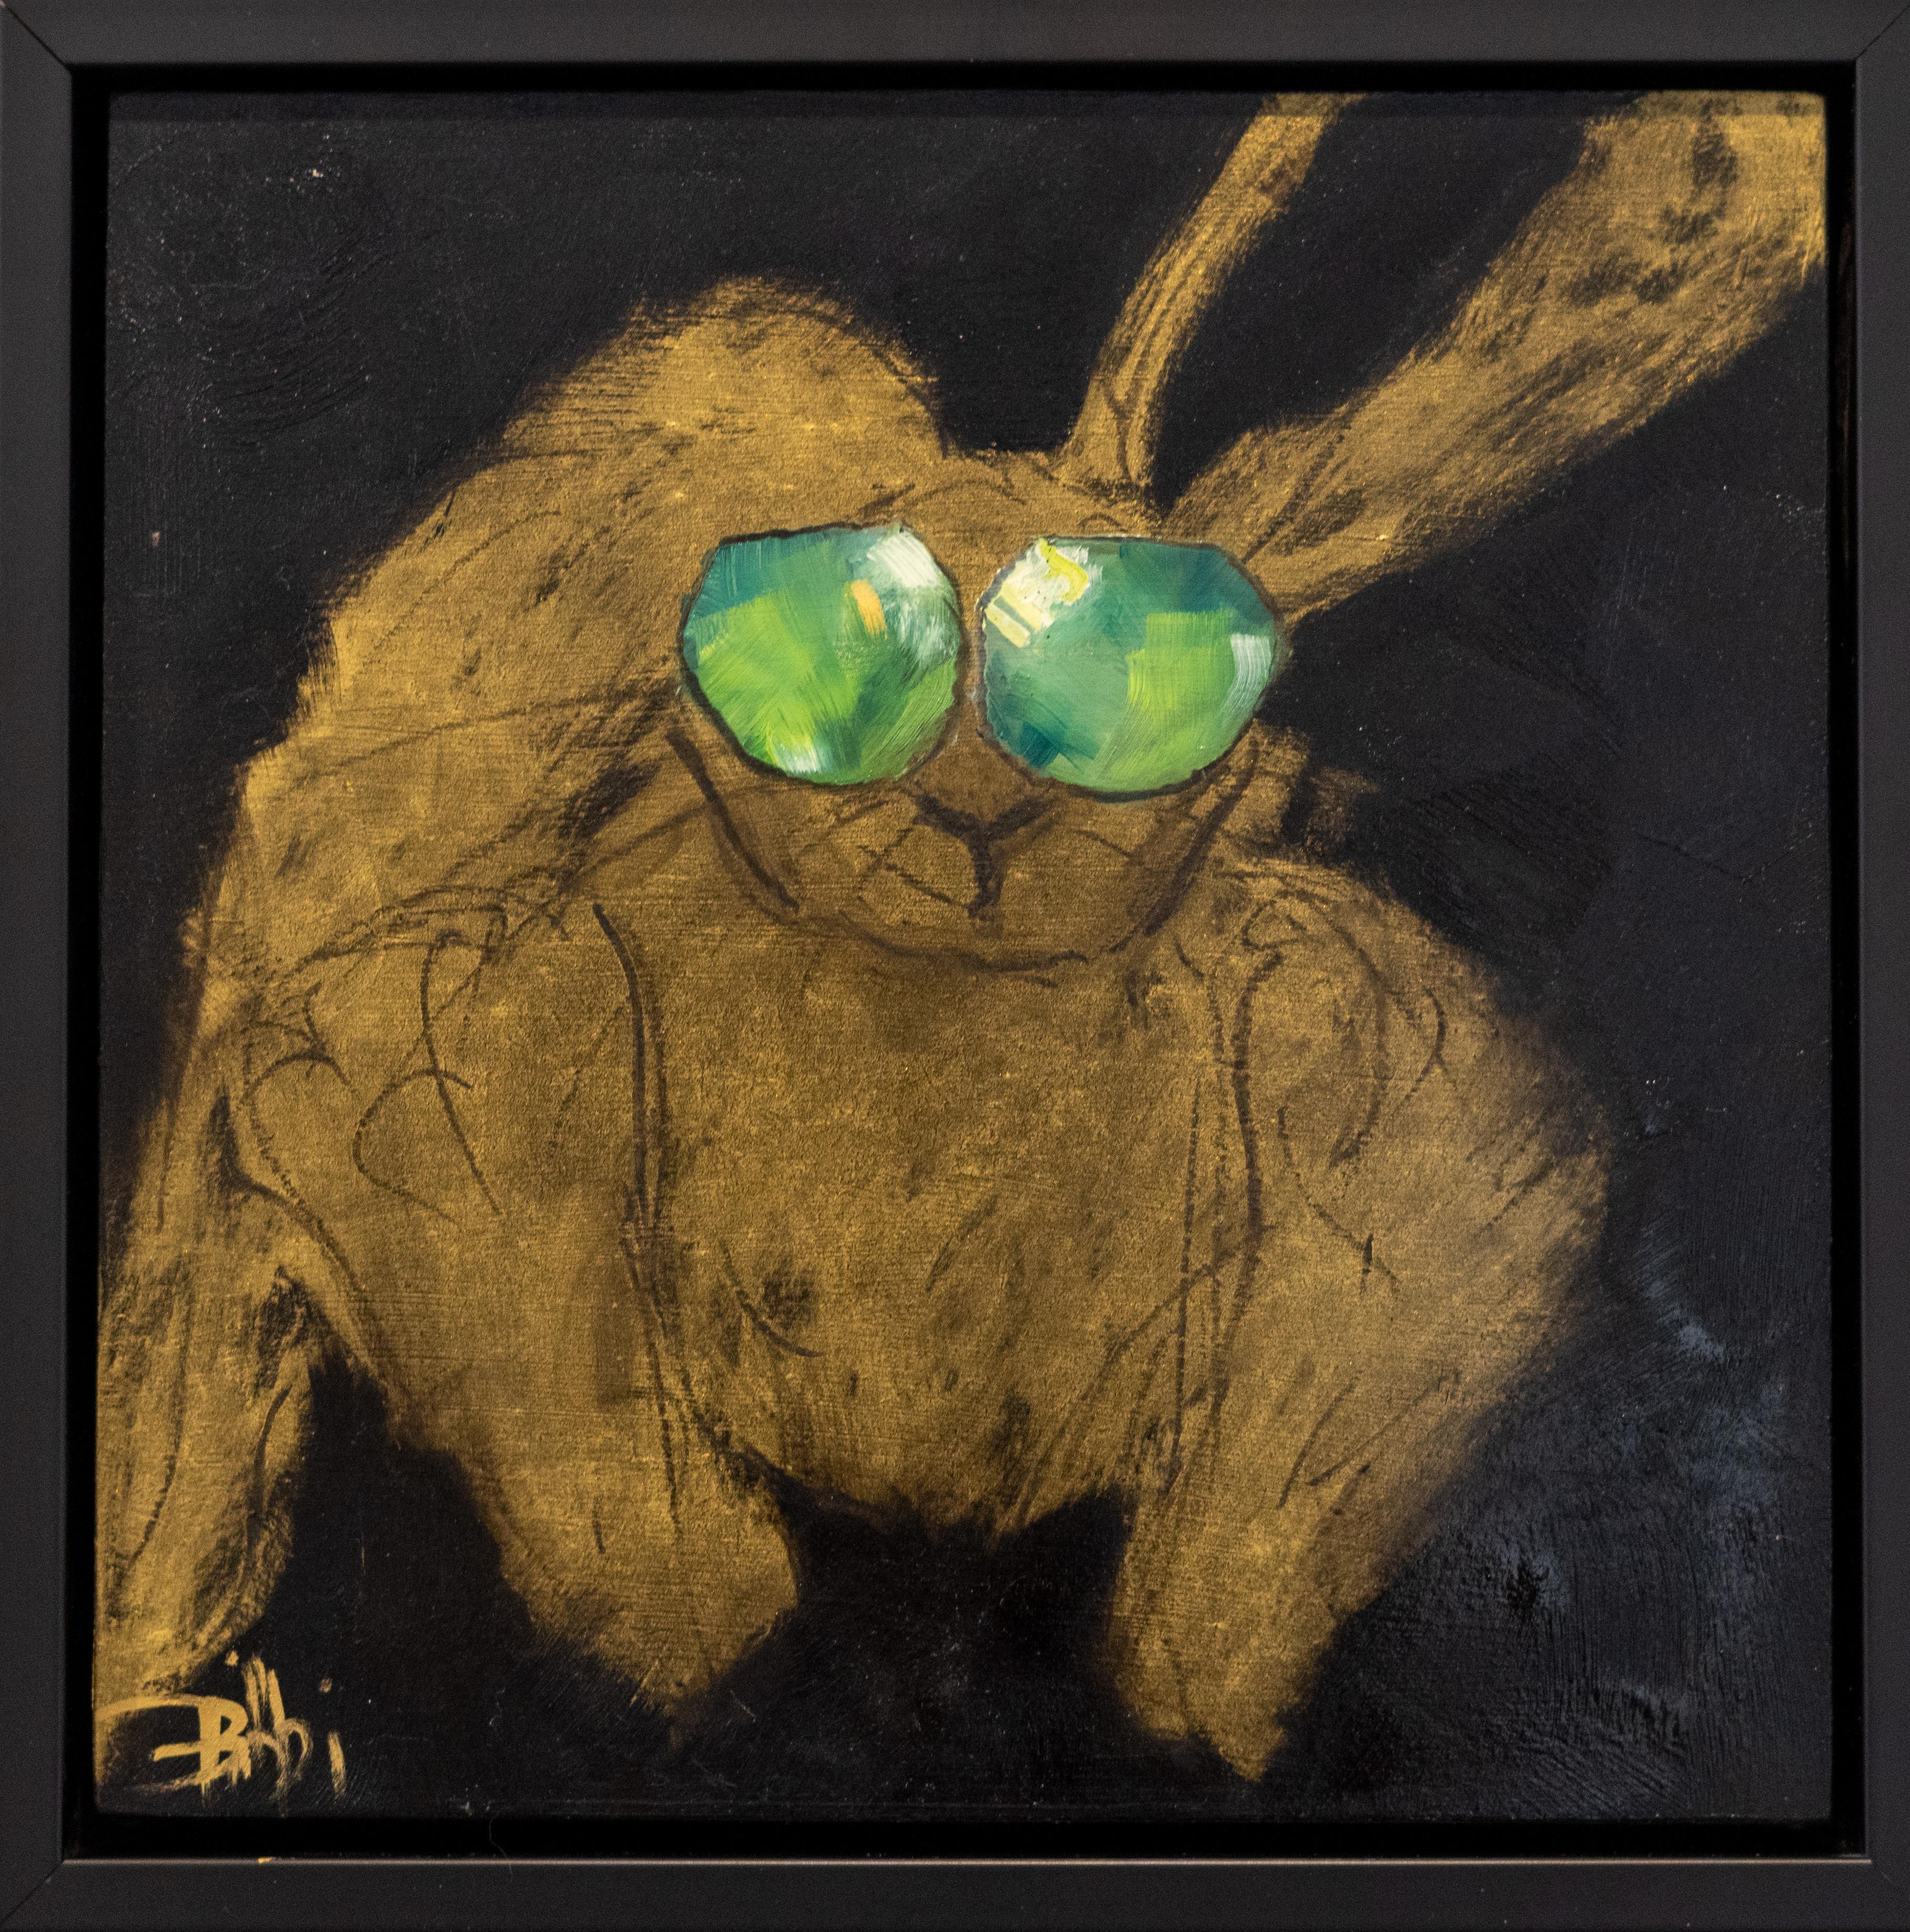 Bibbi Anderson Animal Painting - Golden Hares in Ray Ban Sunglasses  10x10  Contemporary  Framed  Free Shipping